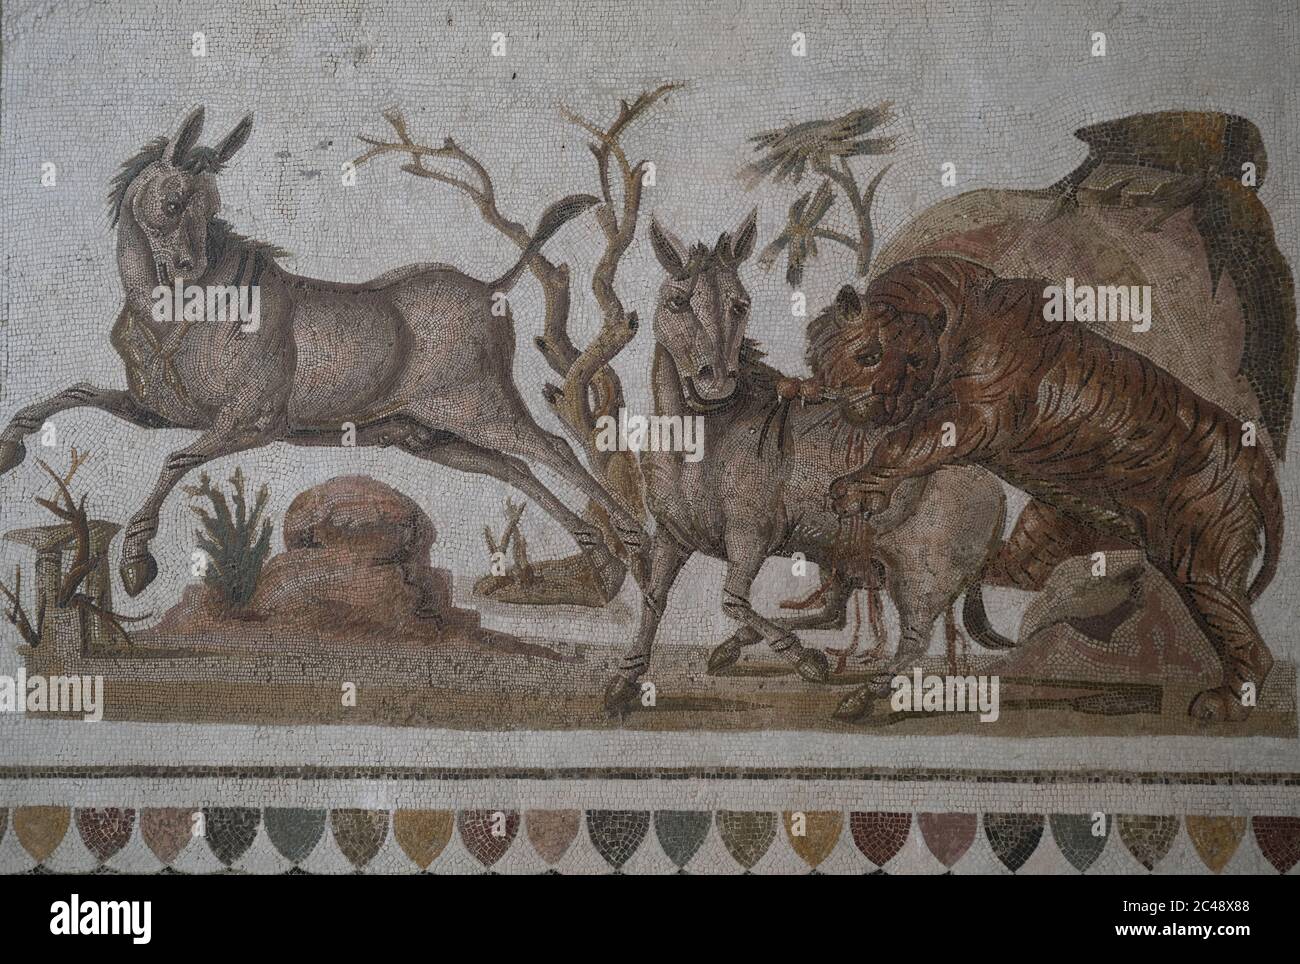 Roman mosaic dating from middle 2nd century AD housed in the Archaeological Museum.It depicts a tiger attacking two onagers.El Jem,Tunisia Stock Photo